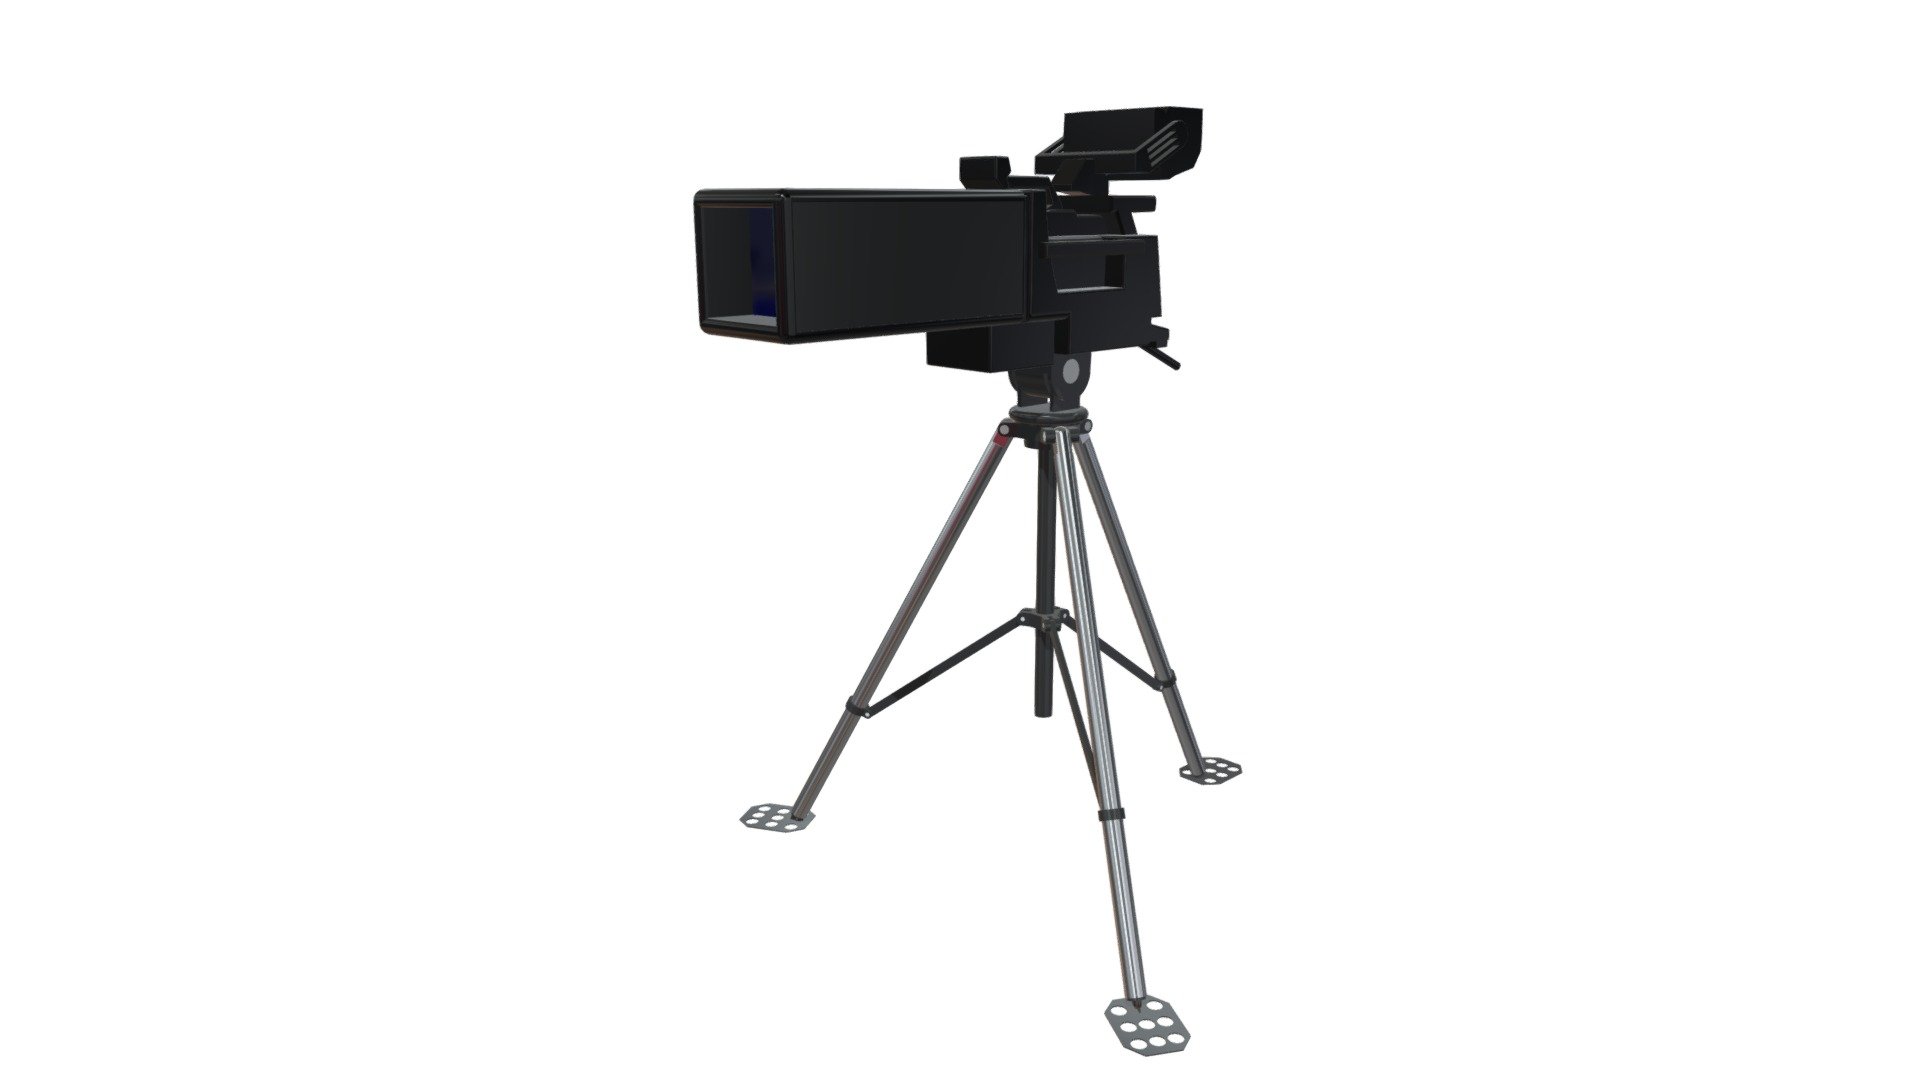 Broadcast Camera
Used for broadcast environments
Last update 09/06/2022 - Broadcast Camera - Buy Royalty Free 3D model by cavicom (@ASI) 3d model